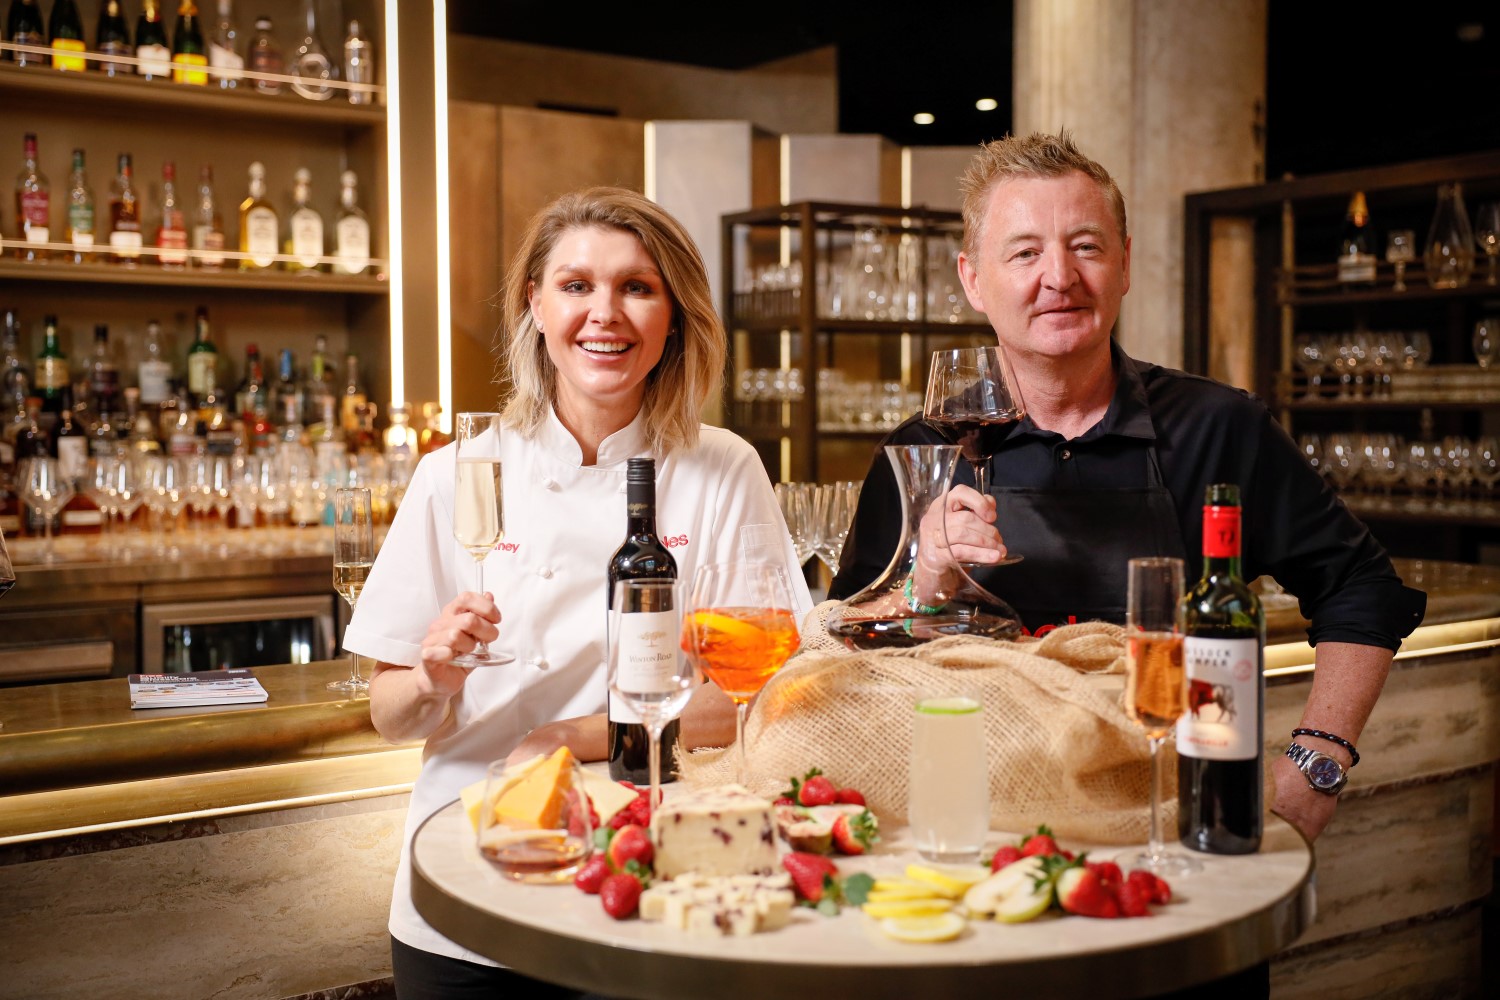 Coles Ambassador Courtney Roulston and Aussie Chef and Restaurateur Luke Mangan unveil Coles and Liquorland’s new Schott Zwiesel Glassware collection. 